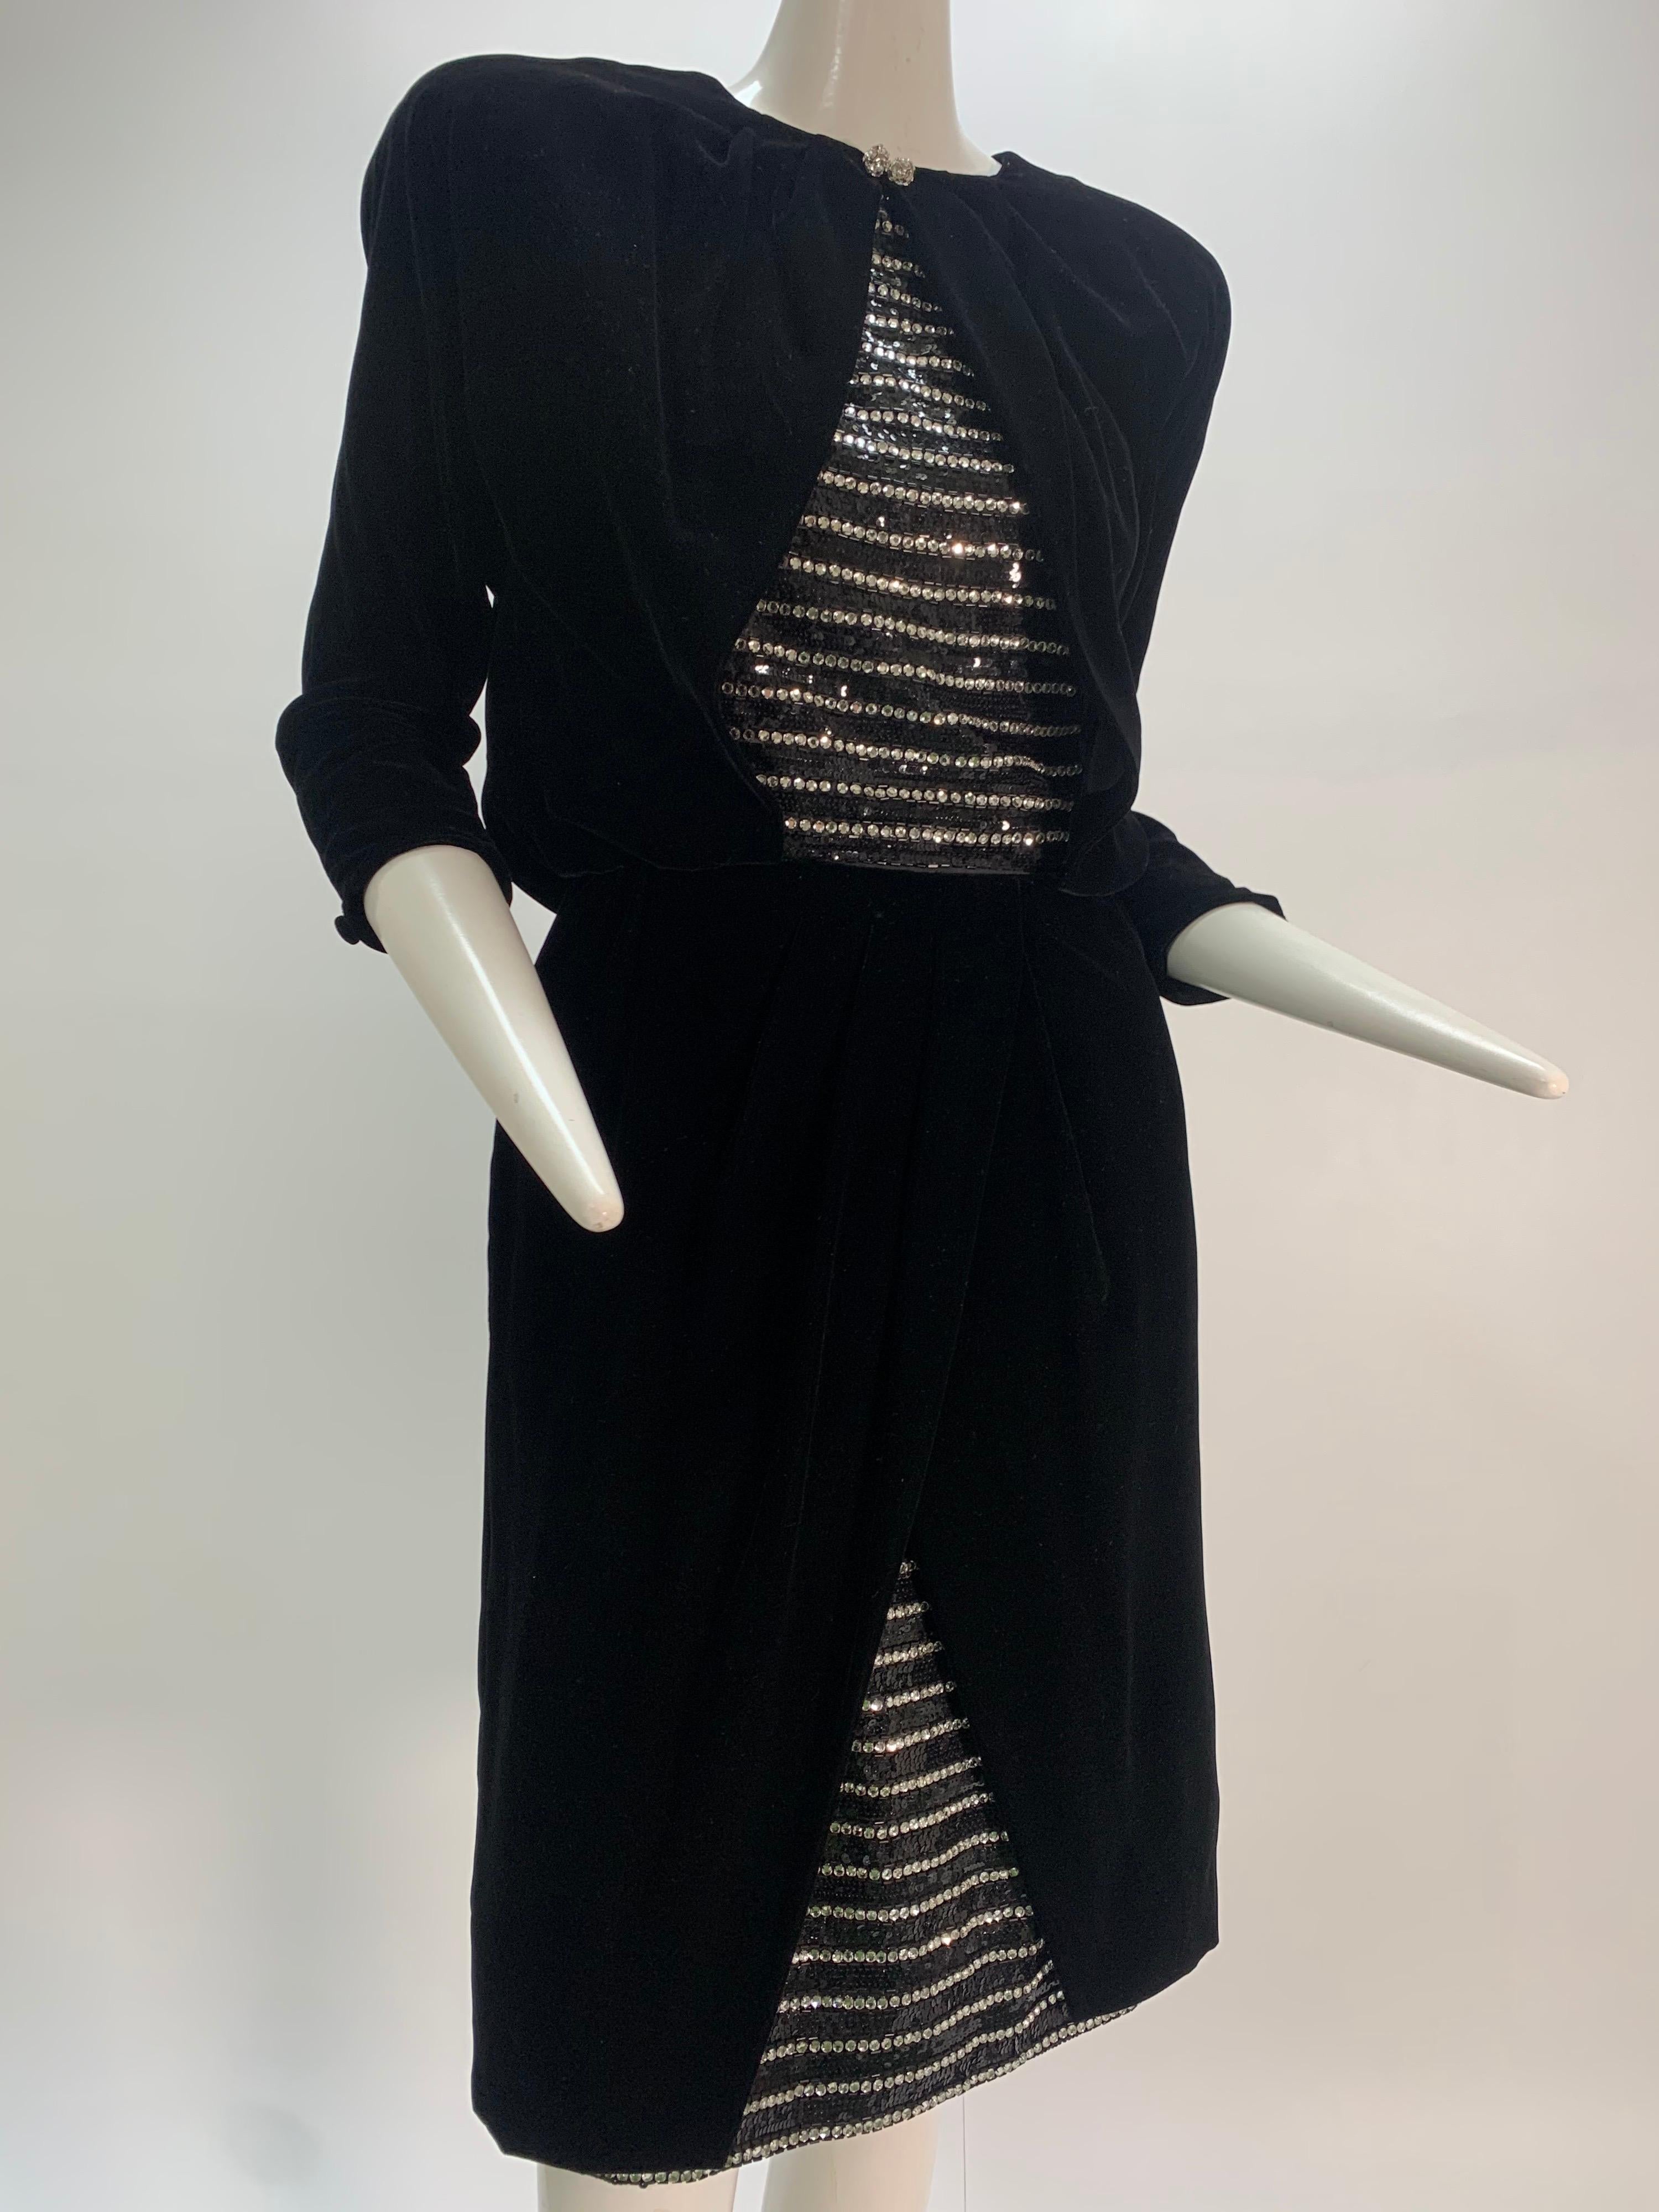 A 1980s Carolyne Roehm black velvet 1940s-inspired cocktail dress: Has the appearance of a suit with exposed panels of rhinestone and sequin striped silk. Structured shoulders and beautifully constructed. 